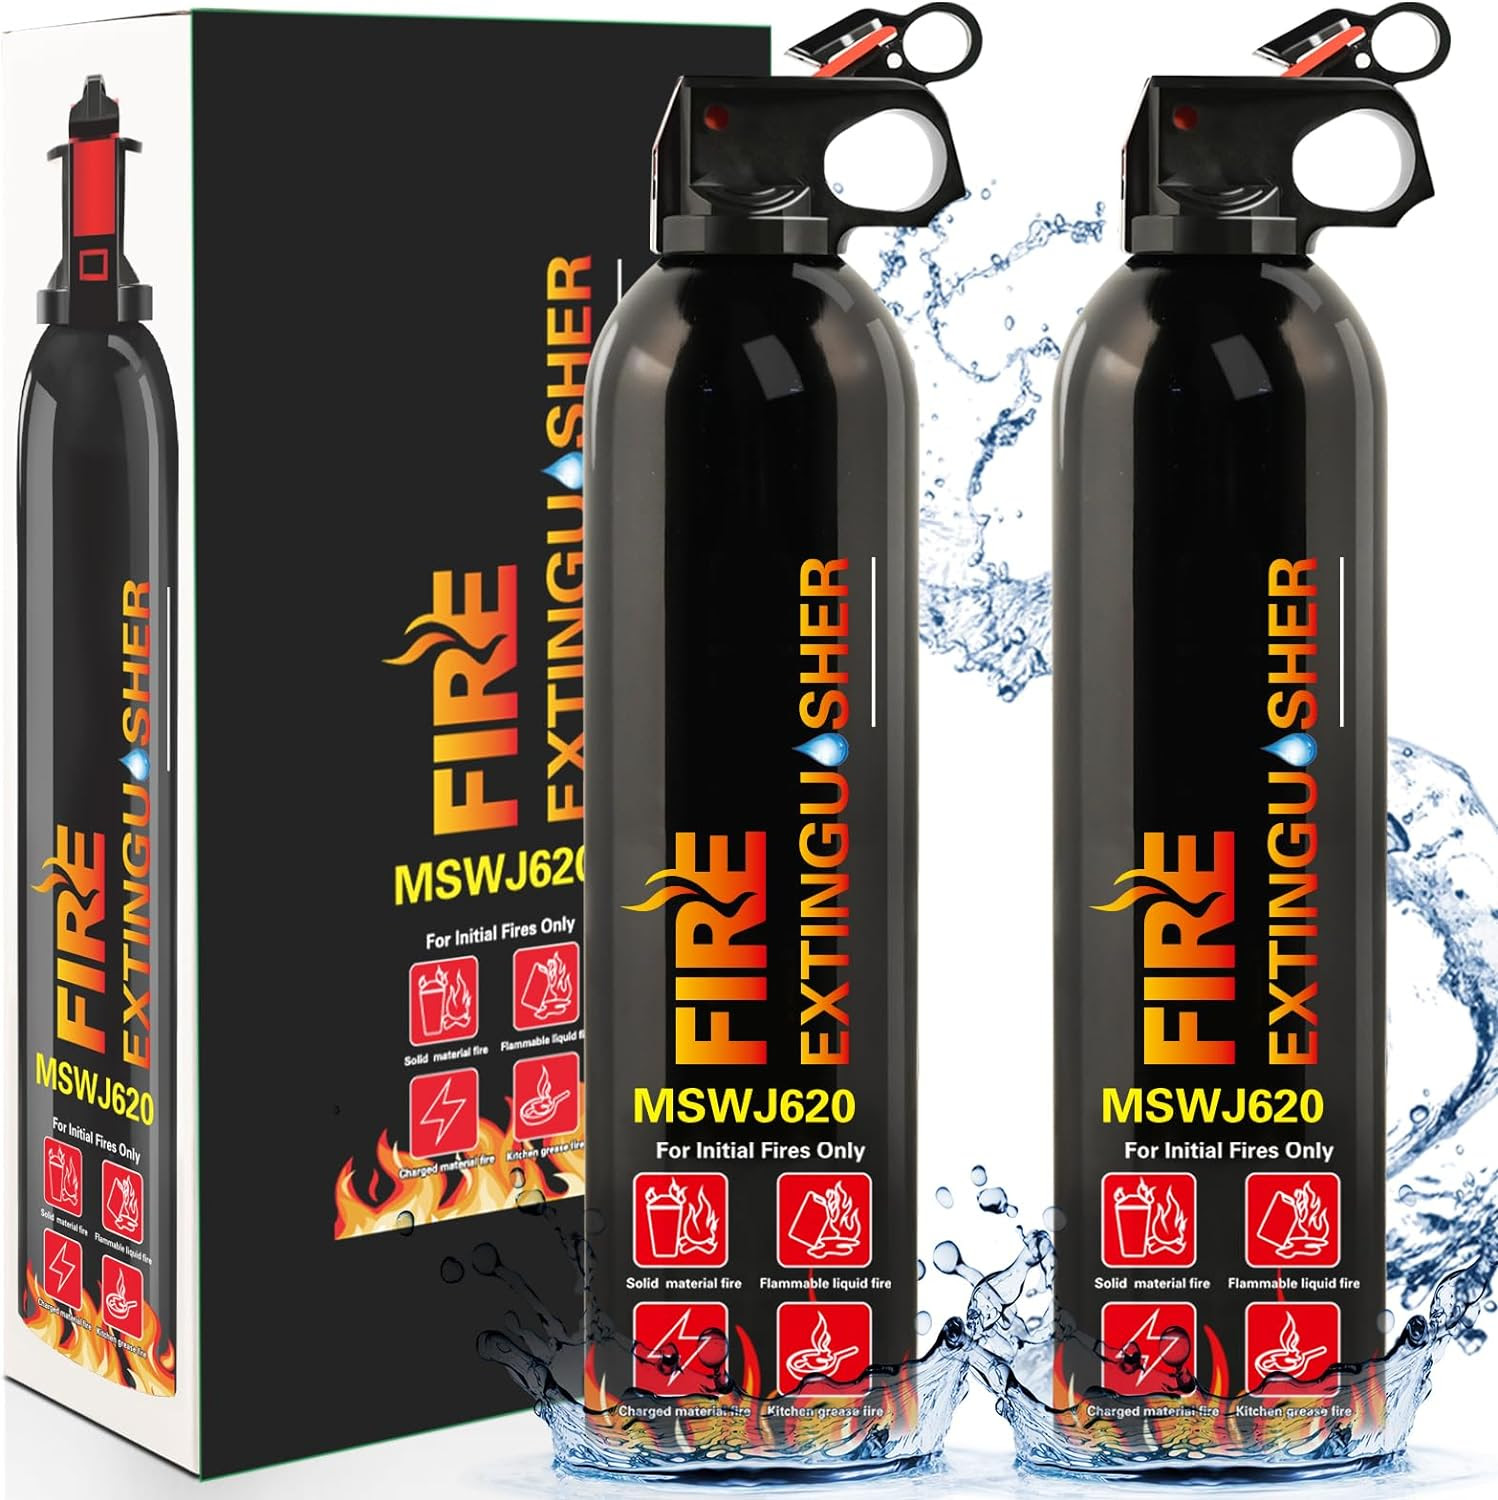 Car Fire Extinguisher with Mount - Fire Extinguisher for Home, Small A B C K Fire Extinguisher, Water-Based Fire 